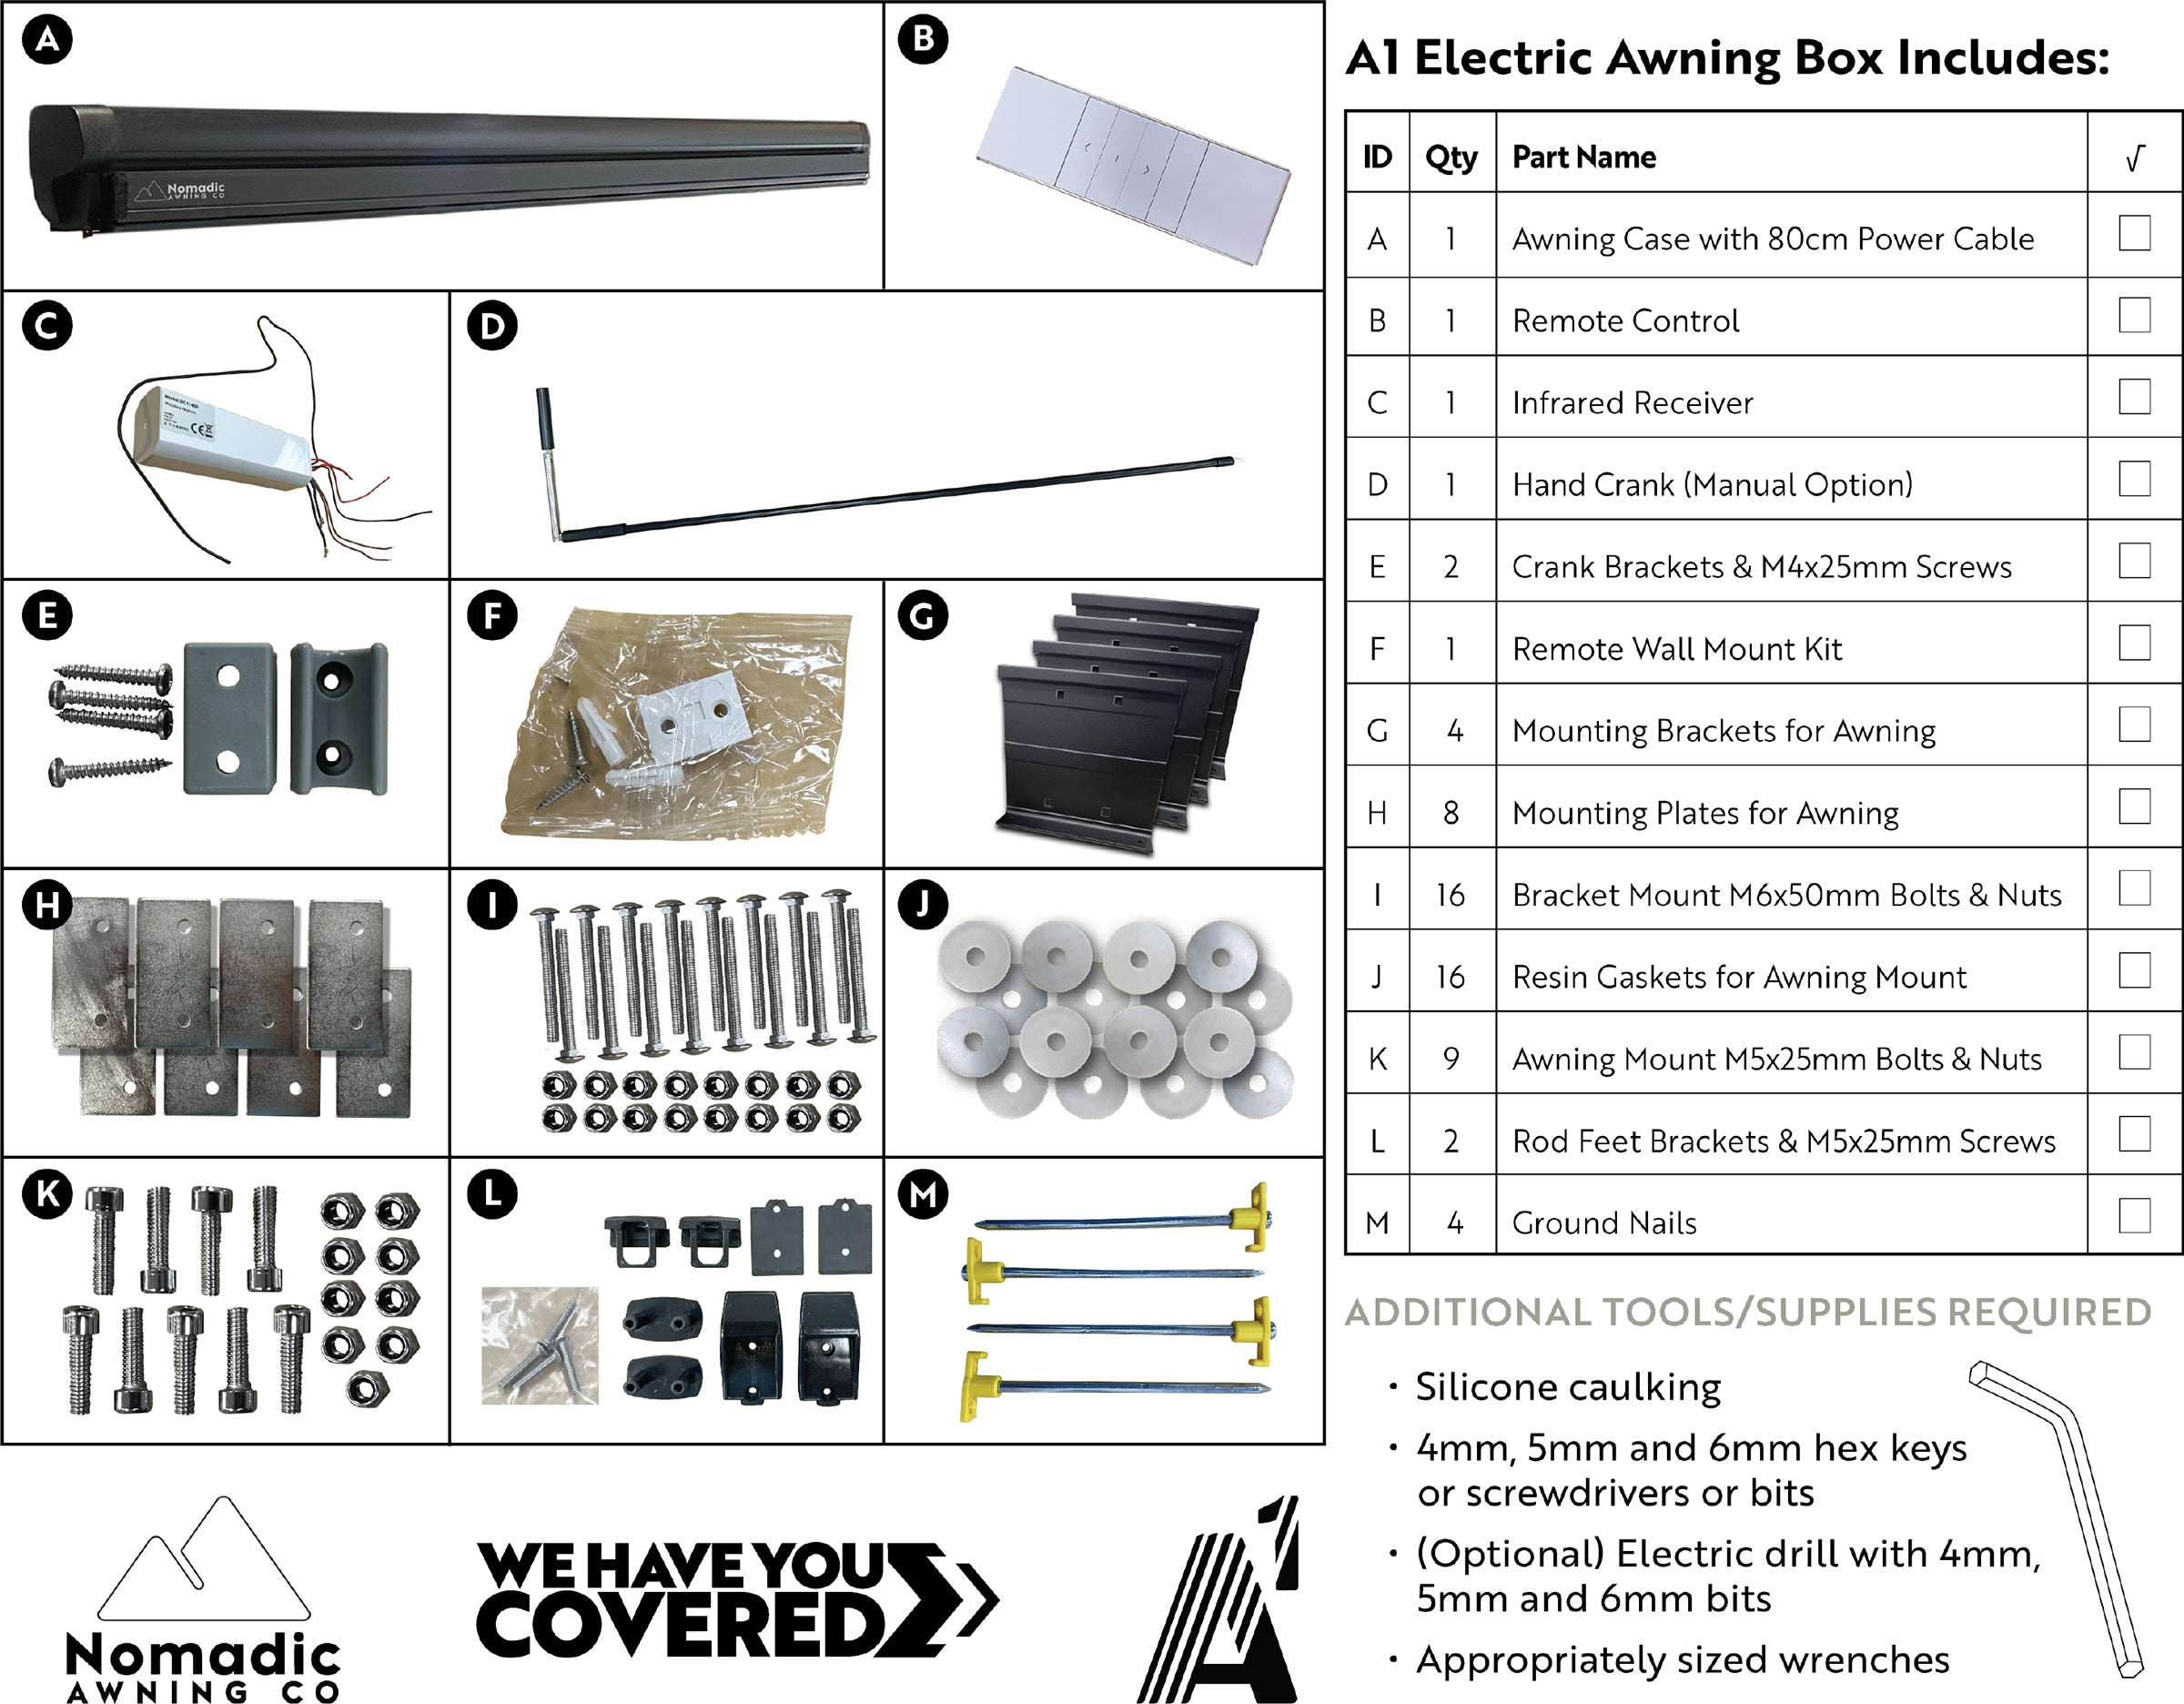 A1 Parts List - everything in the box. Note: Switch for light not included.